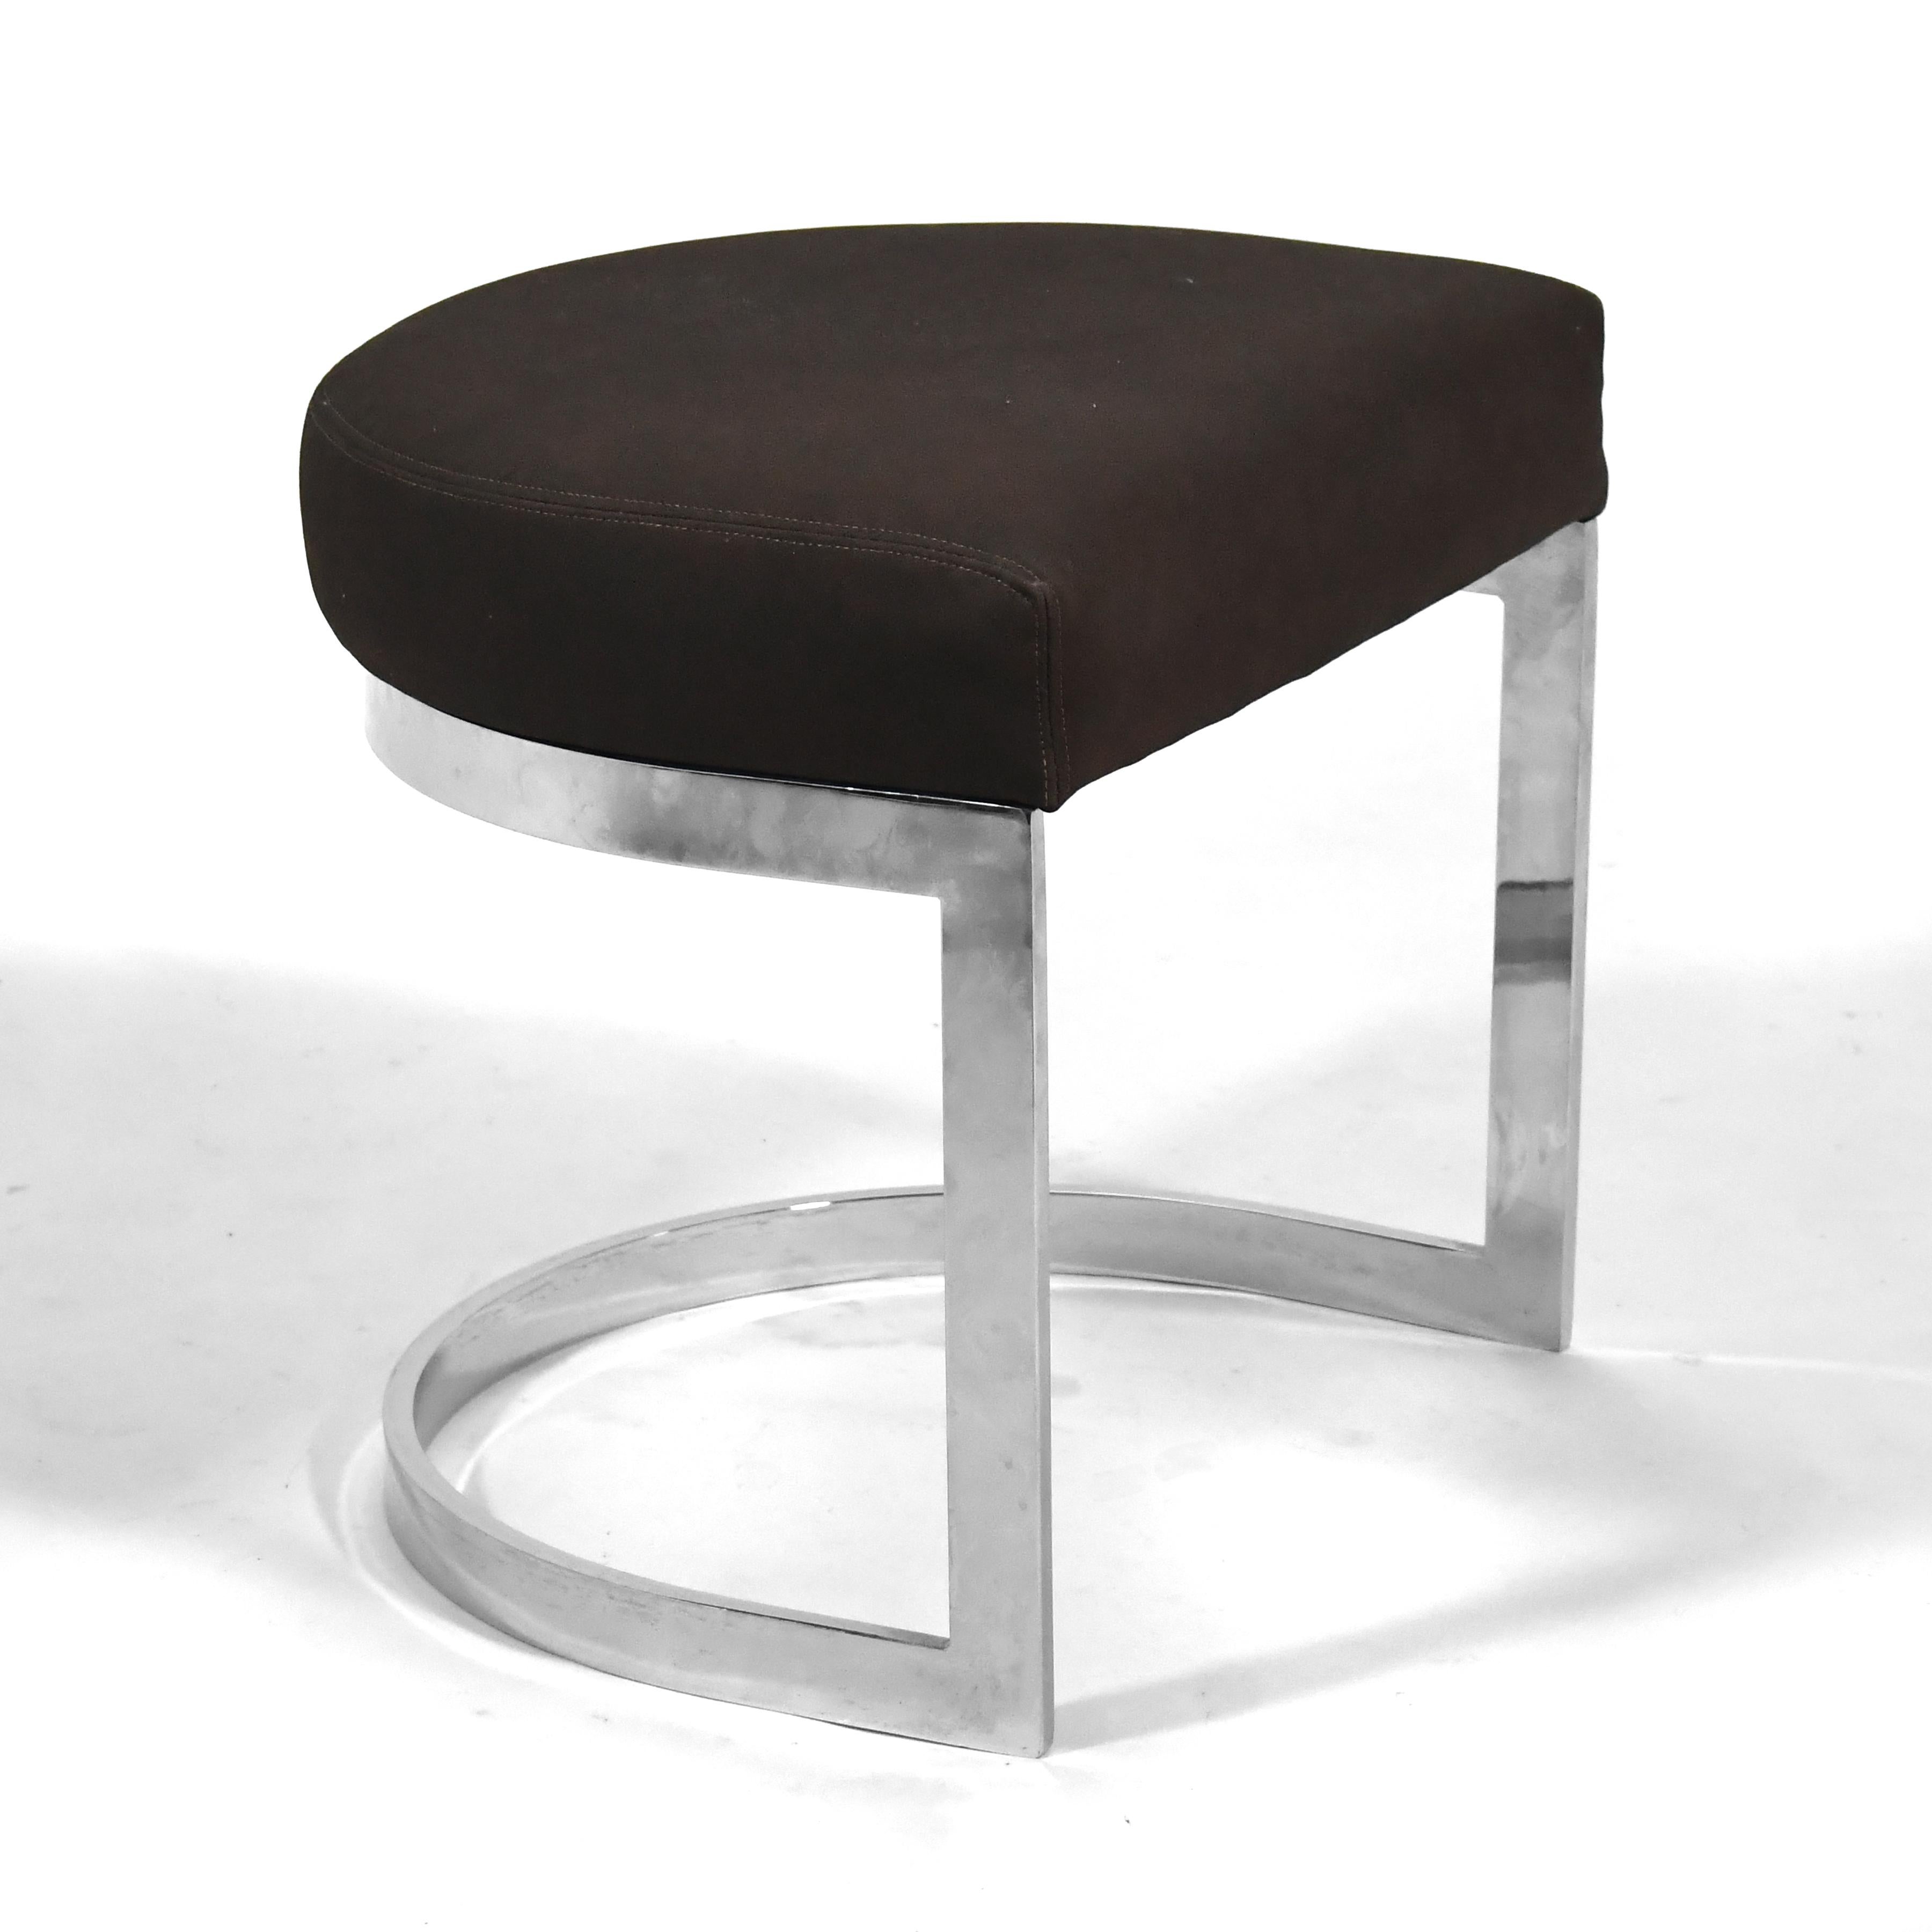 This sleek little stool has an half-round upholstered seat supported by chromed steel cantelievered base. The design reminds us of a similar design by Warren Bacon and shares qualities with the work of Milo Baughman.

18.5